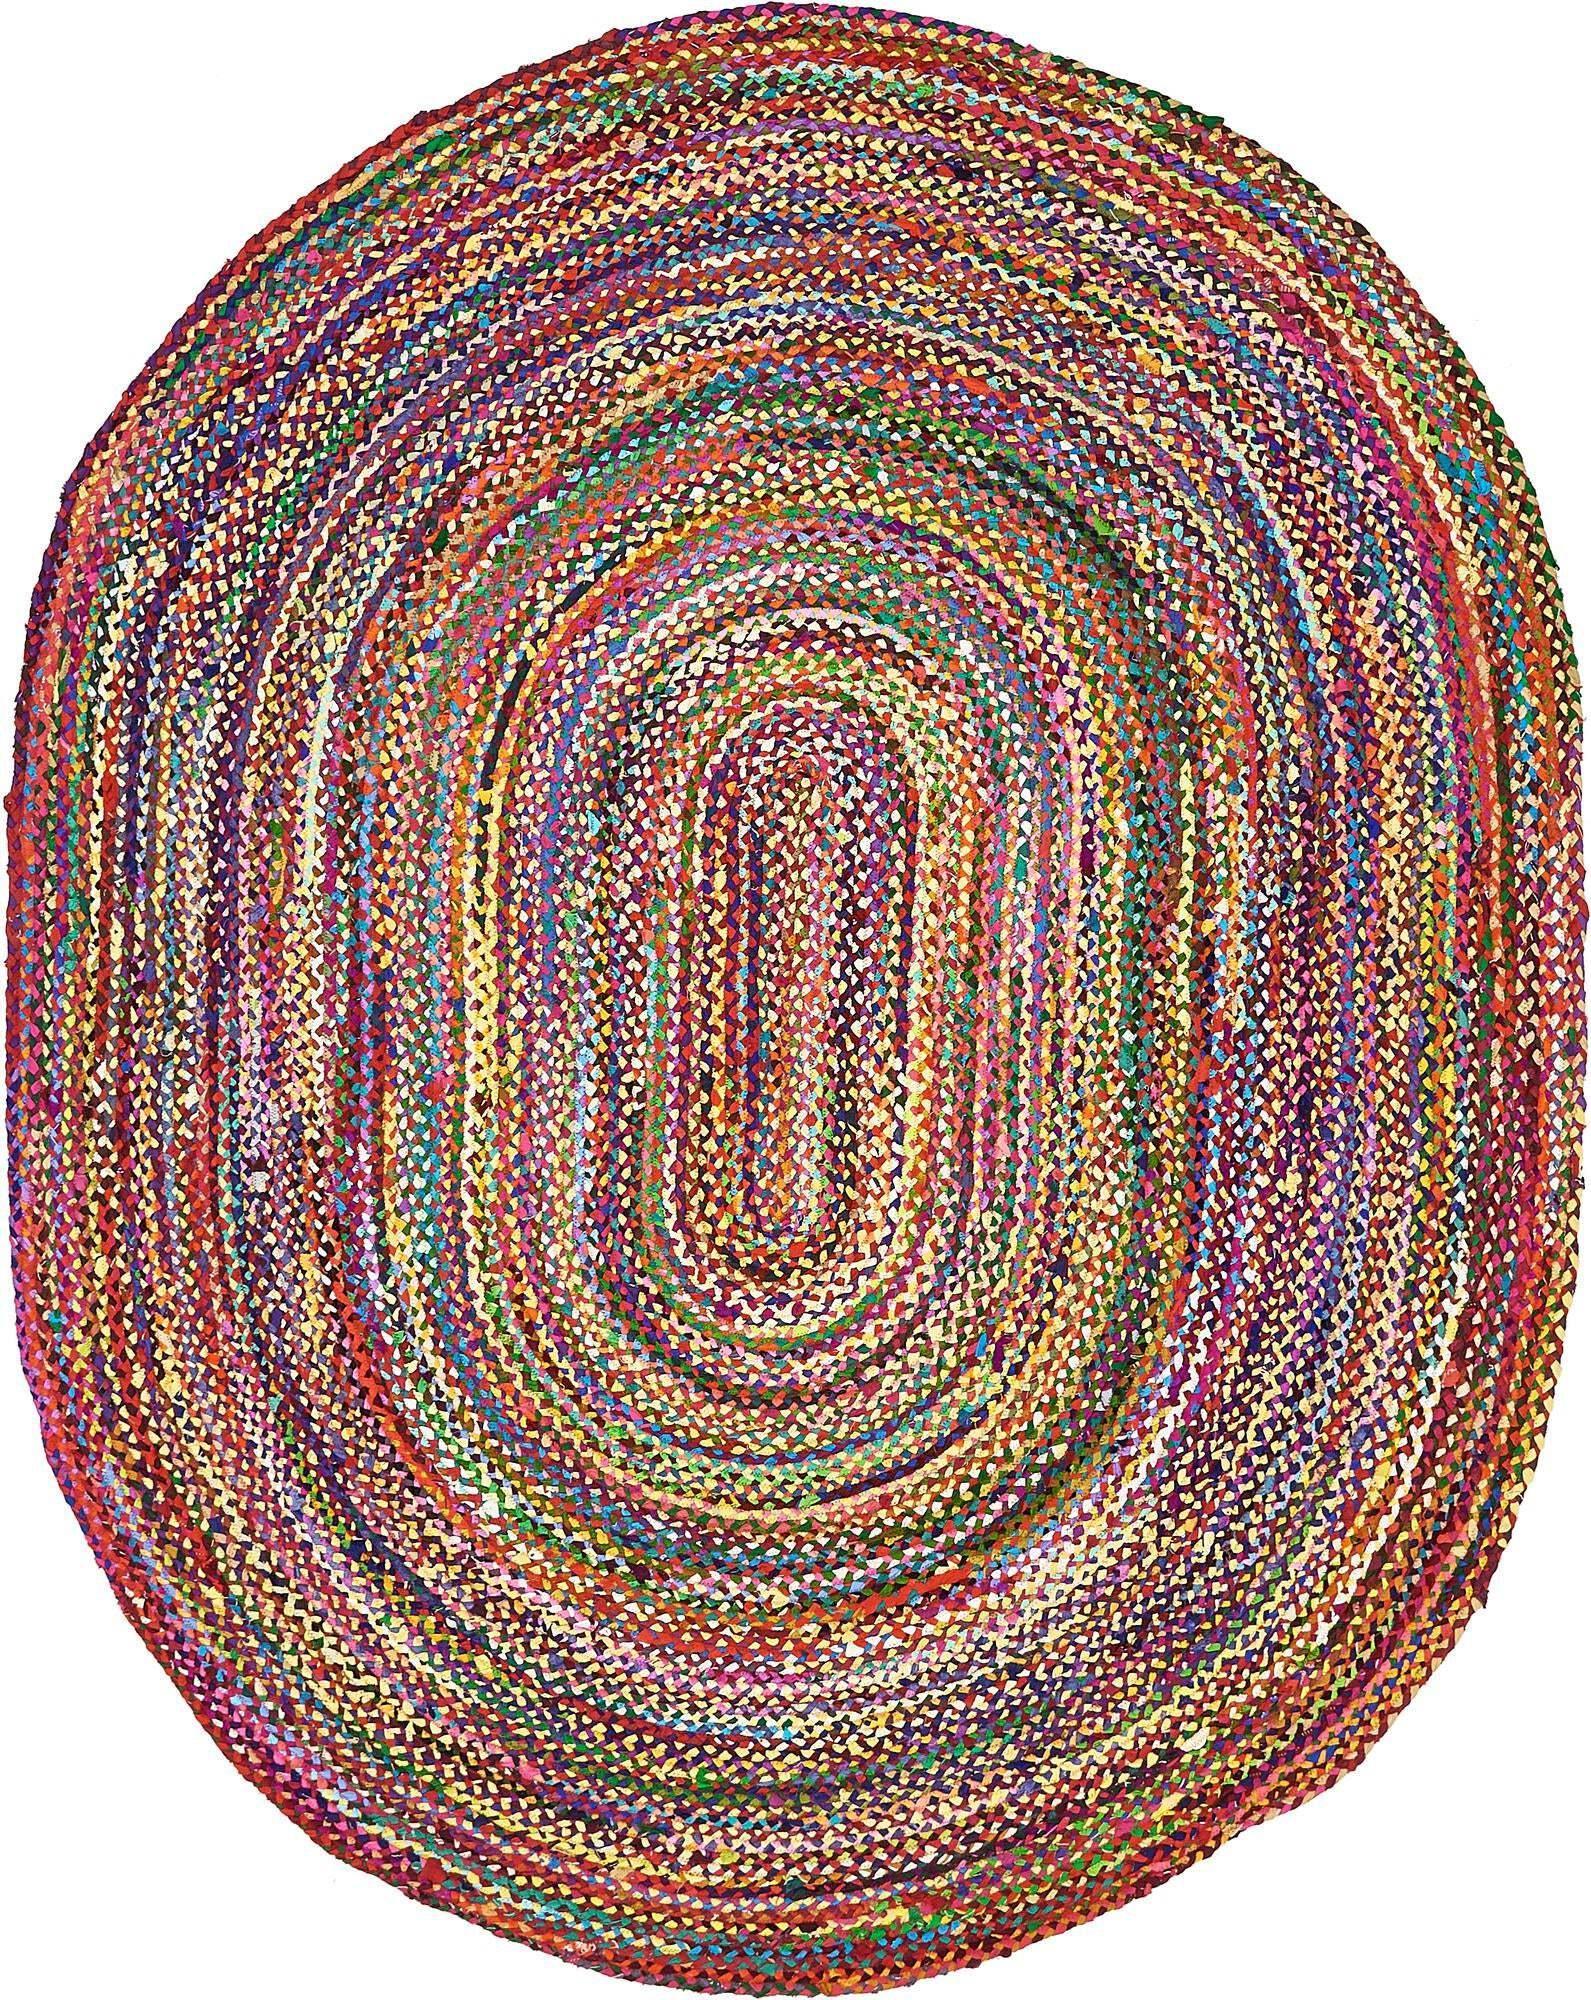 Shop Braided Chindi Abstract Oval 8x10 Oval Rug Multi & Pink